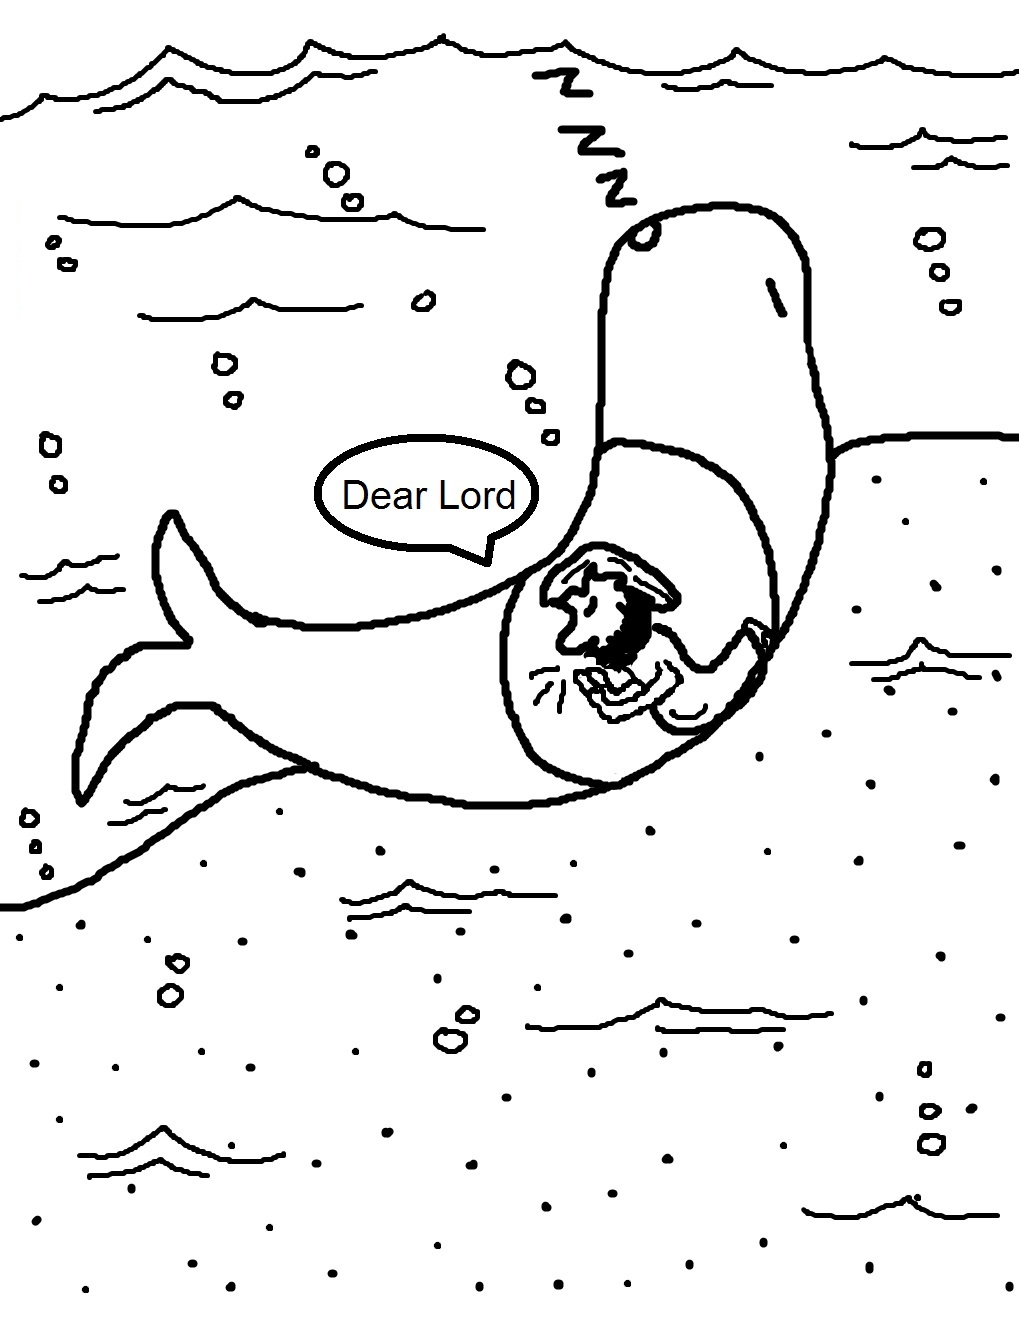 jonah praying in whale no scripture coloring pages Jonah And The Whale Coloring Page